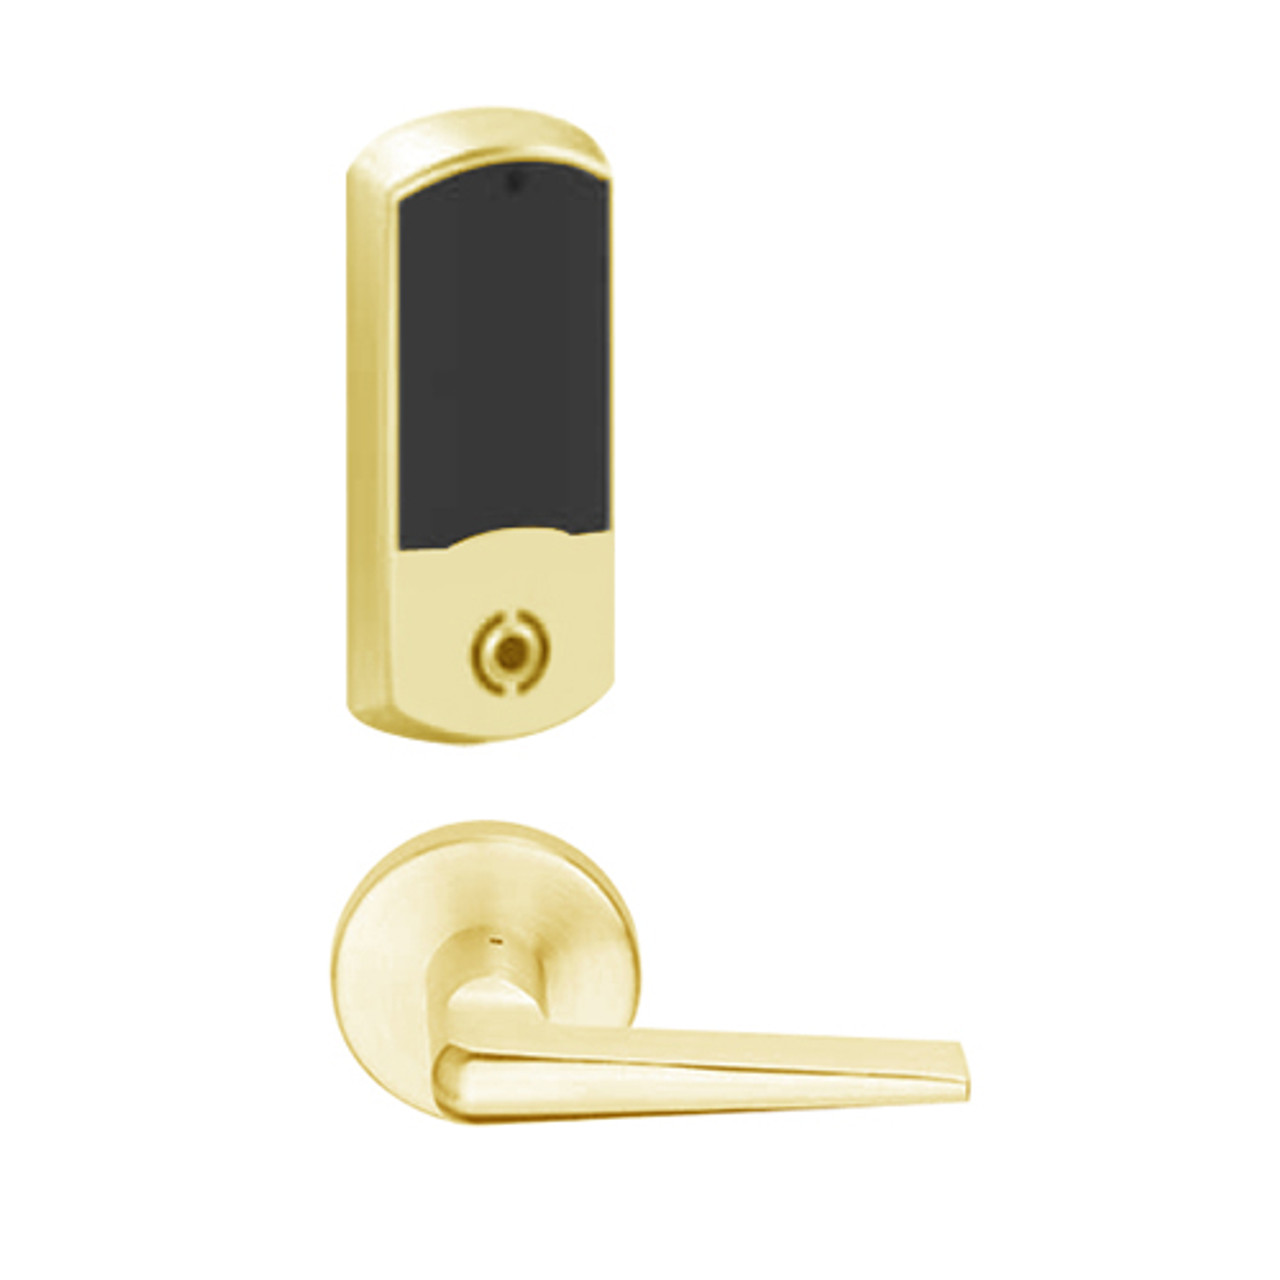 LEMS-GRW-J-05-605-00C Schlage Storeroom Wireless Greenwich Mortise Lock with LED Indicator and 05 Lever Prepped for FSIC in Bright Brass